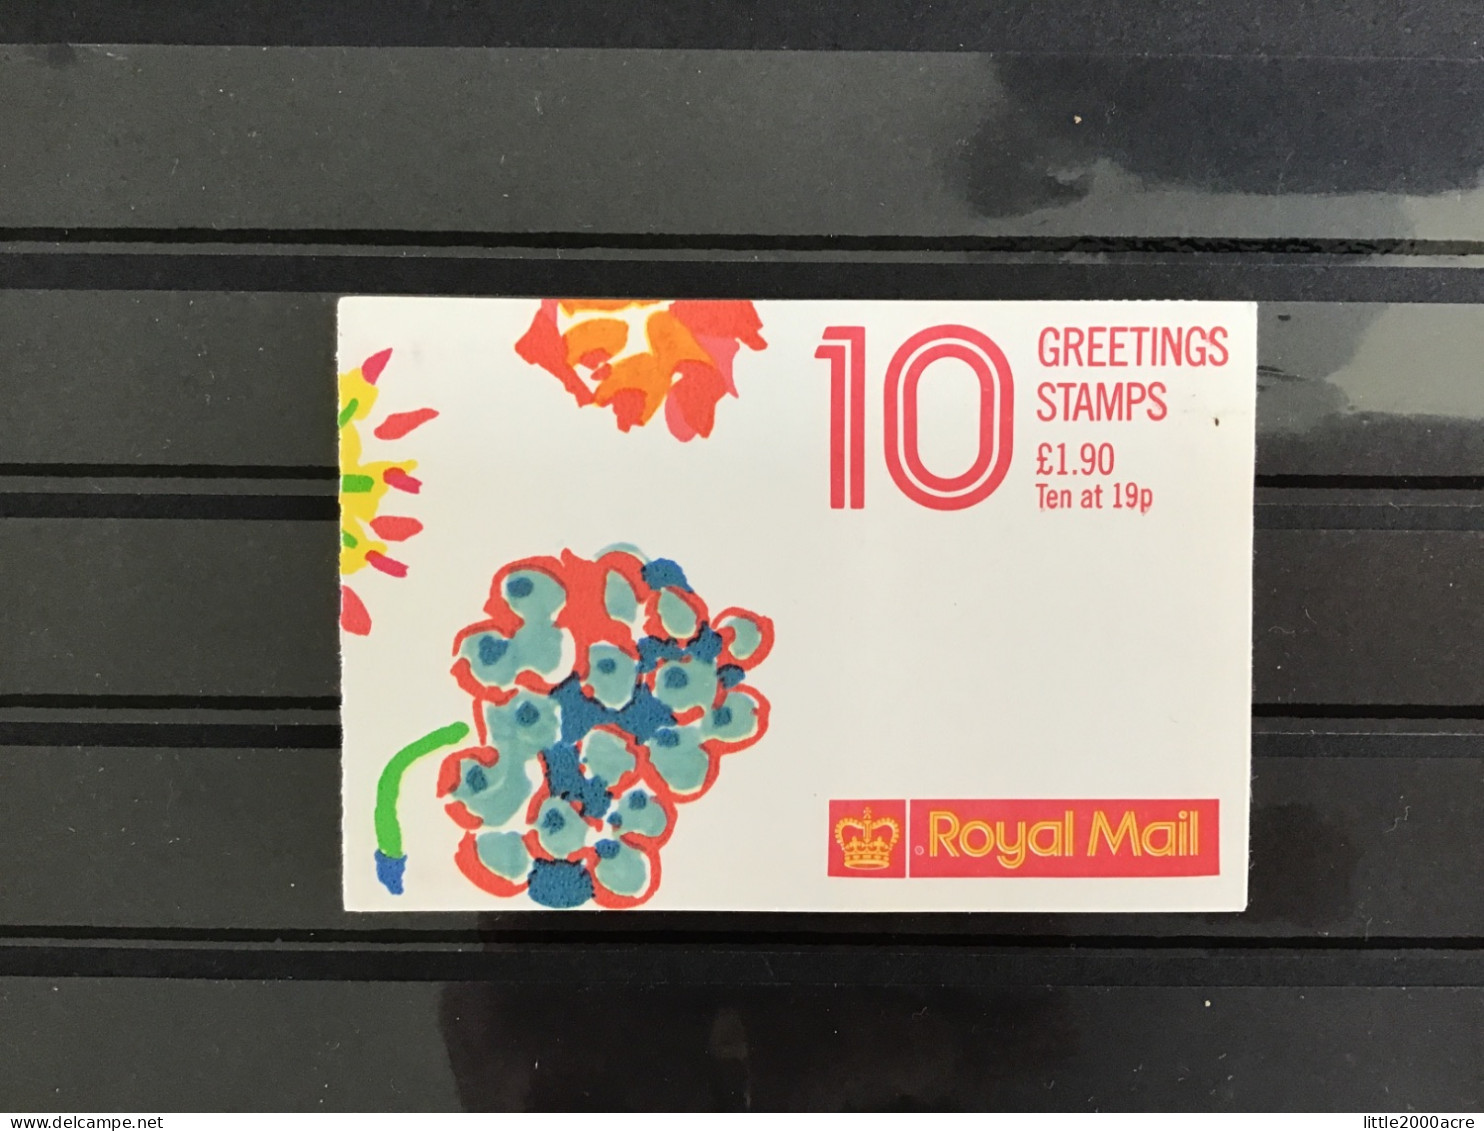 GB 1989 10 19p Greeting Stamps Booklet £1.90 MNH SG FY1 - Booklets